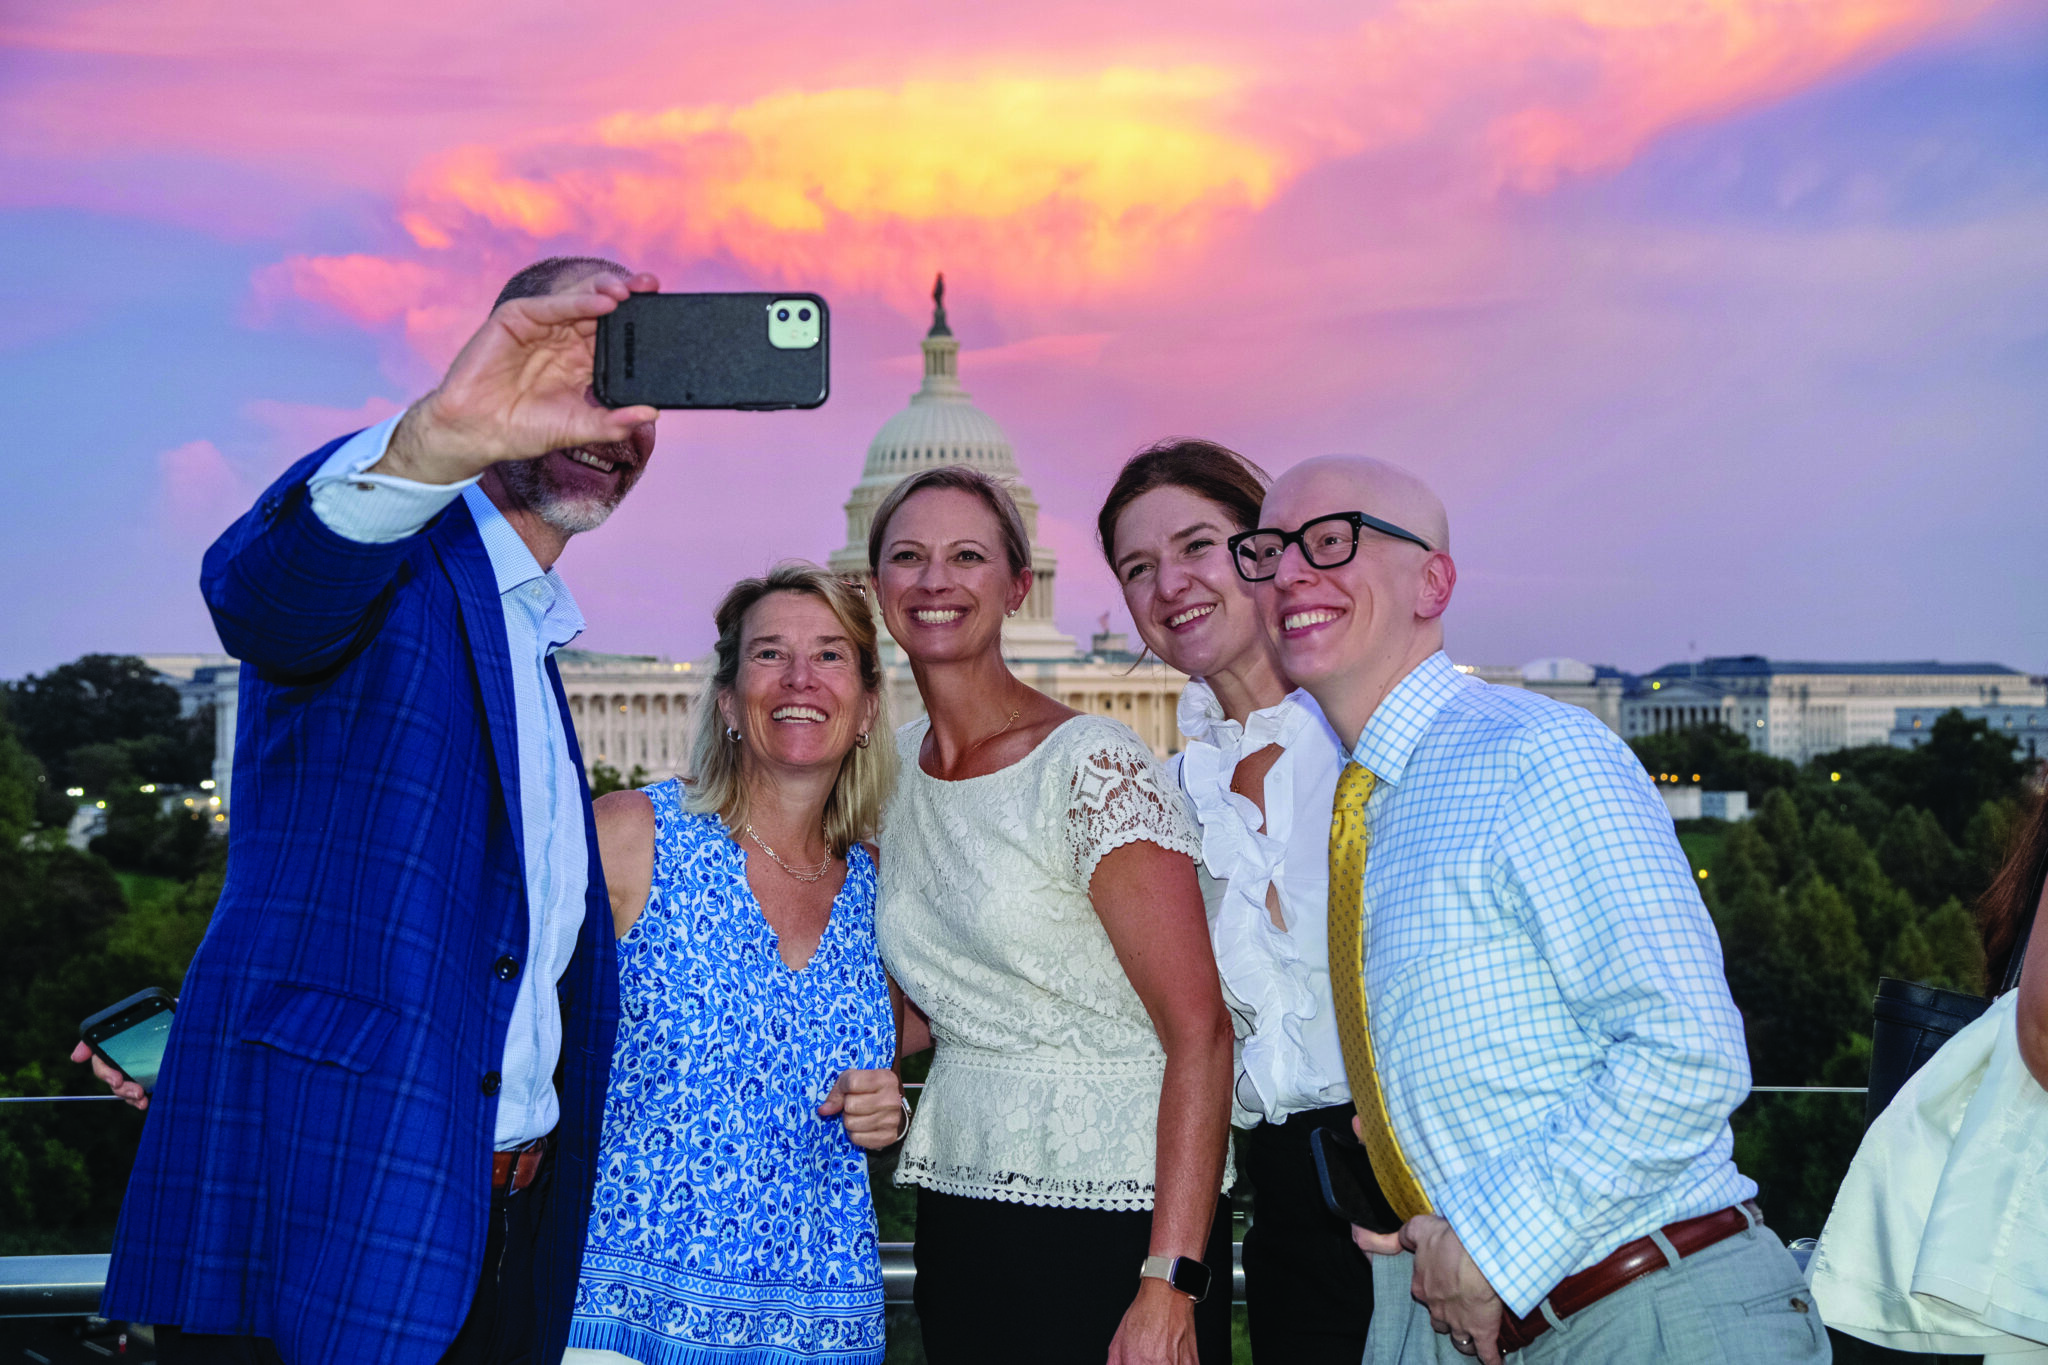 People smiling, taking a selfie at sunset with the U.S. Capitol in the background.